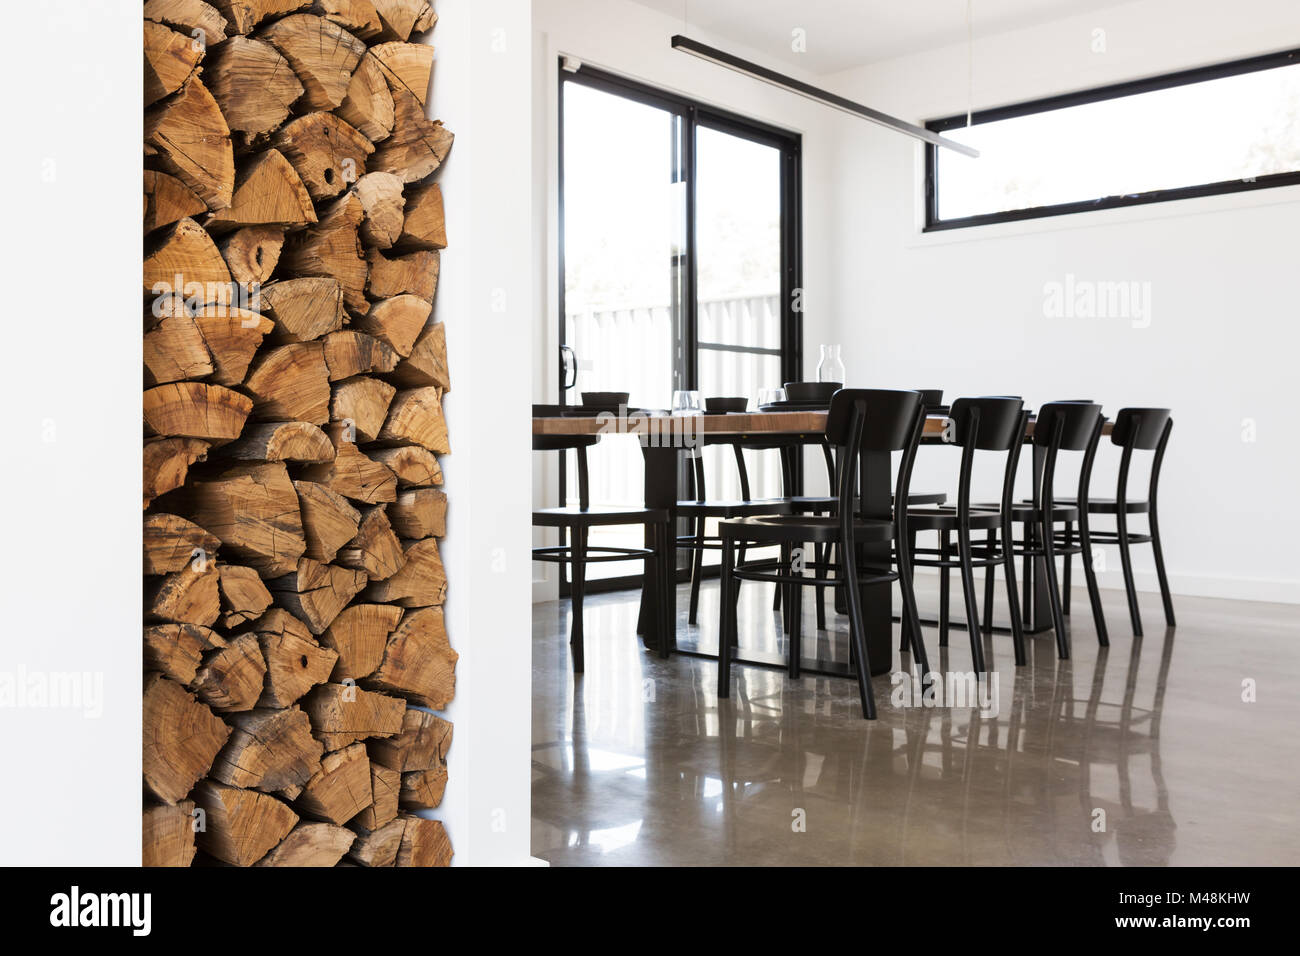 Wood stack feature in lounge with dining table in background Stock Photo